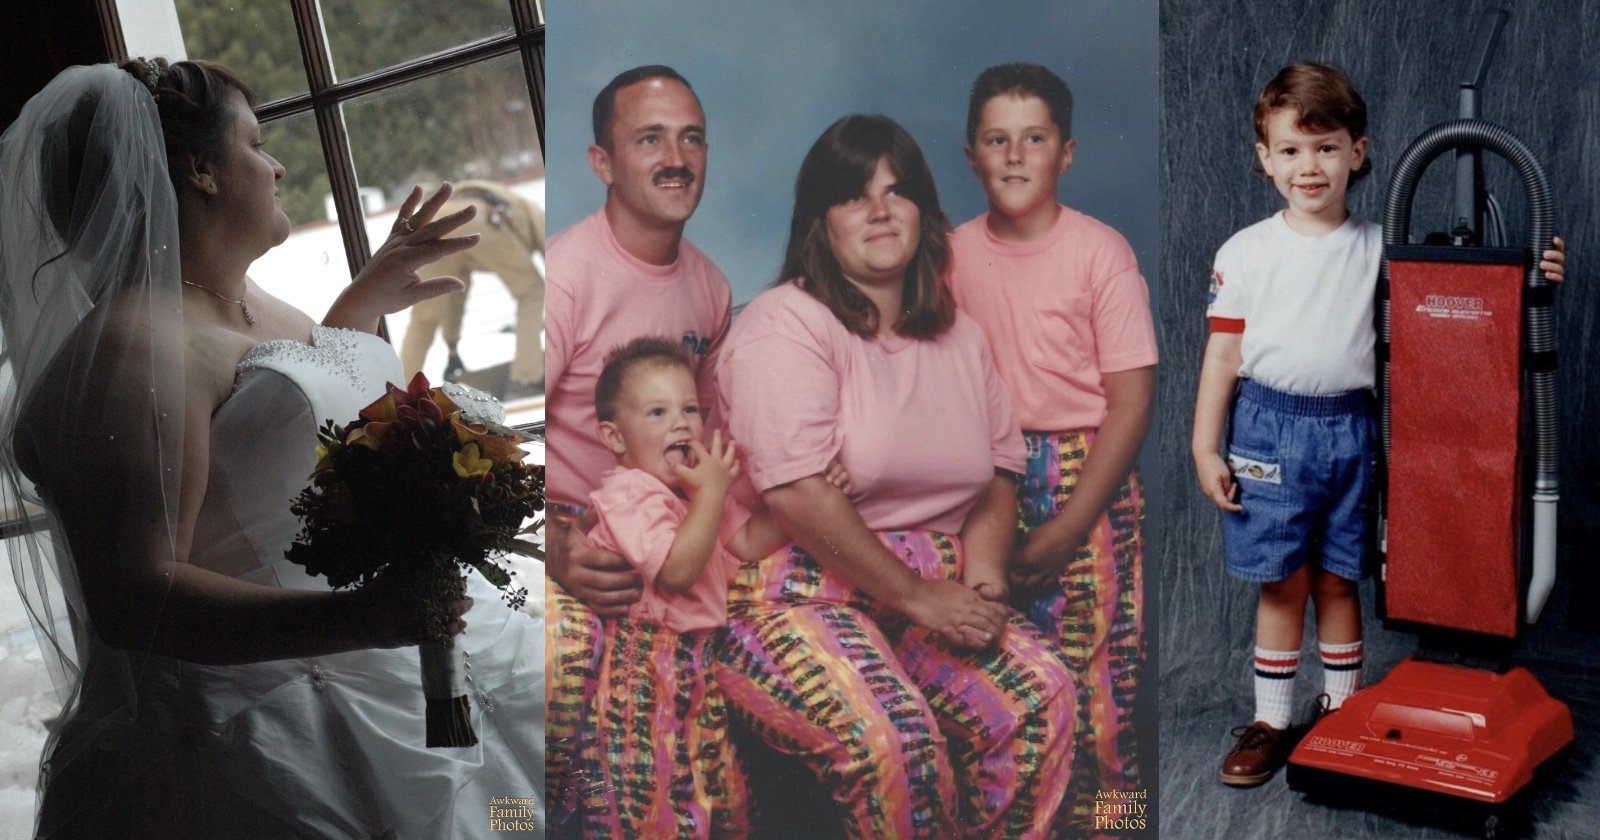  museum exhibit showcases most awkward family photos ever 